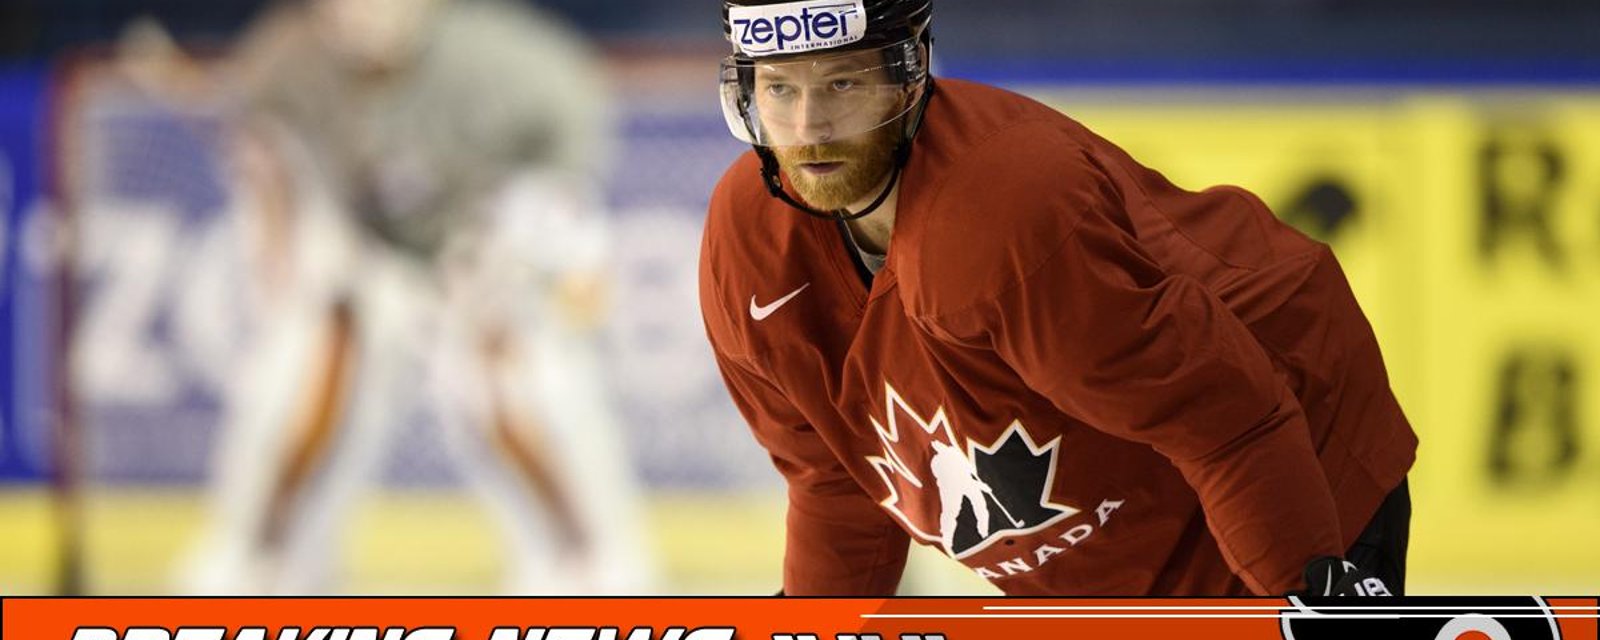 BREAKING : Giroux gets a chance to rebuild confidence. 